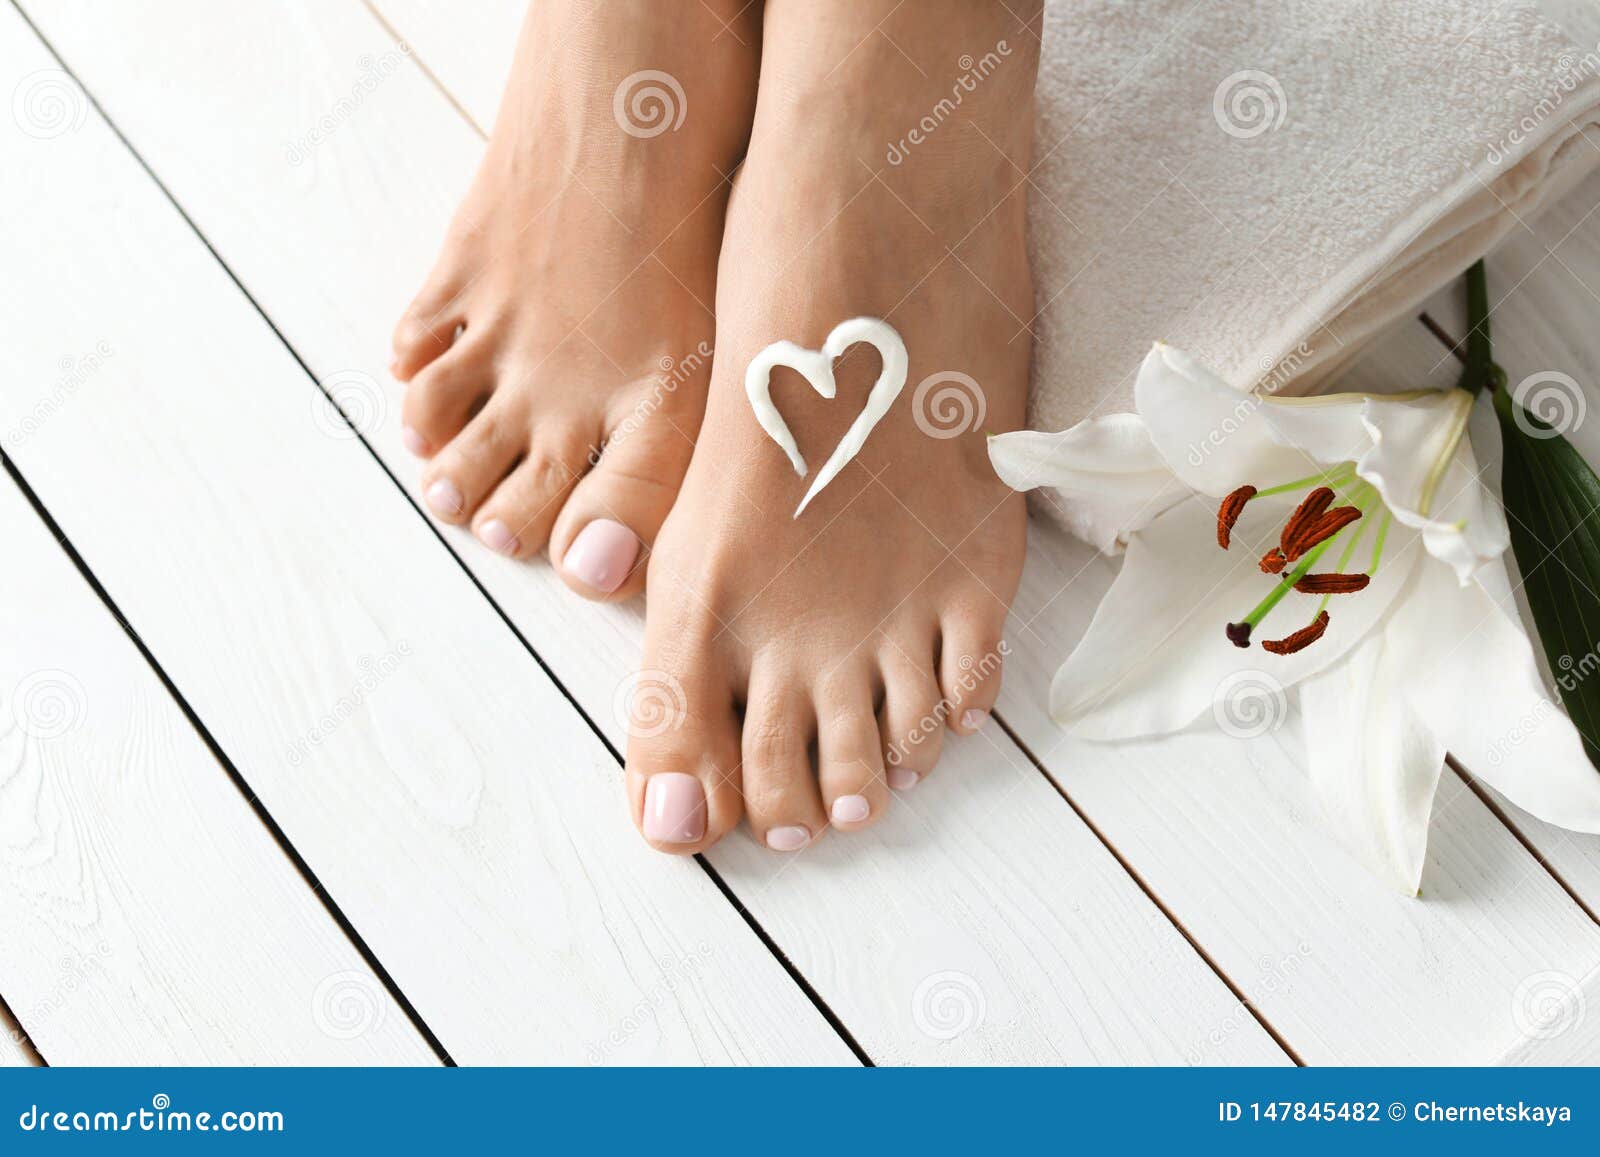 Woman with Beautiful Feet, Cream, Flower and Towel on White Wooden Floor,  Closeup. Stock Photo - Image of closeup, legs: 147845482